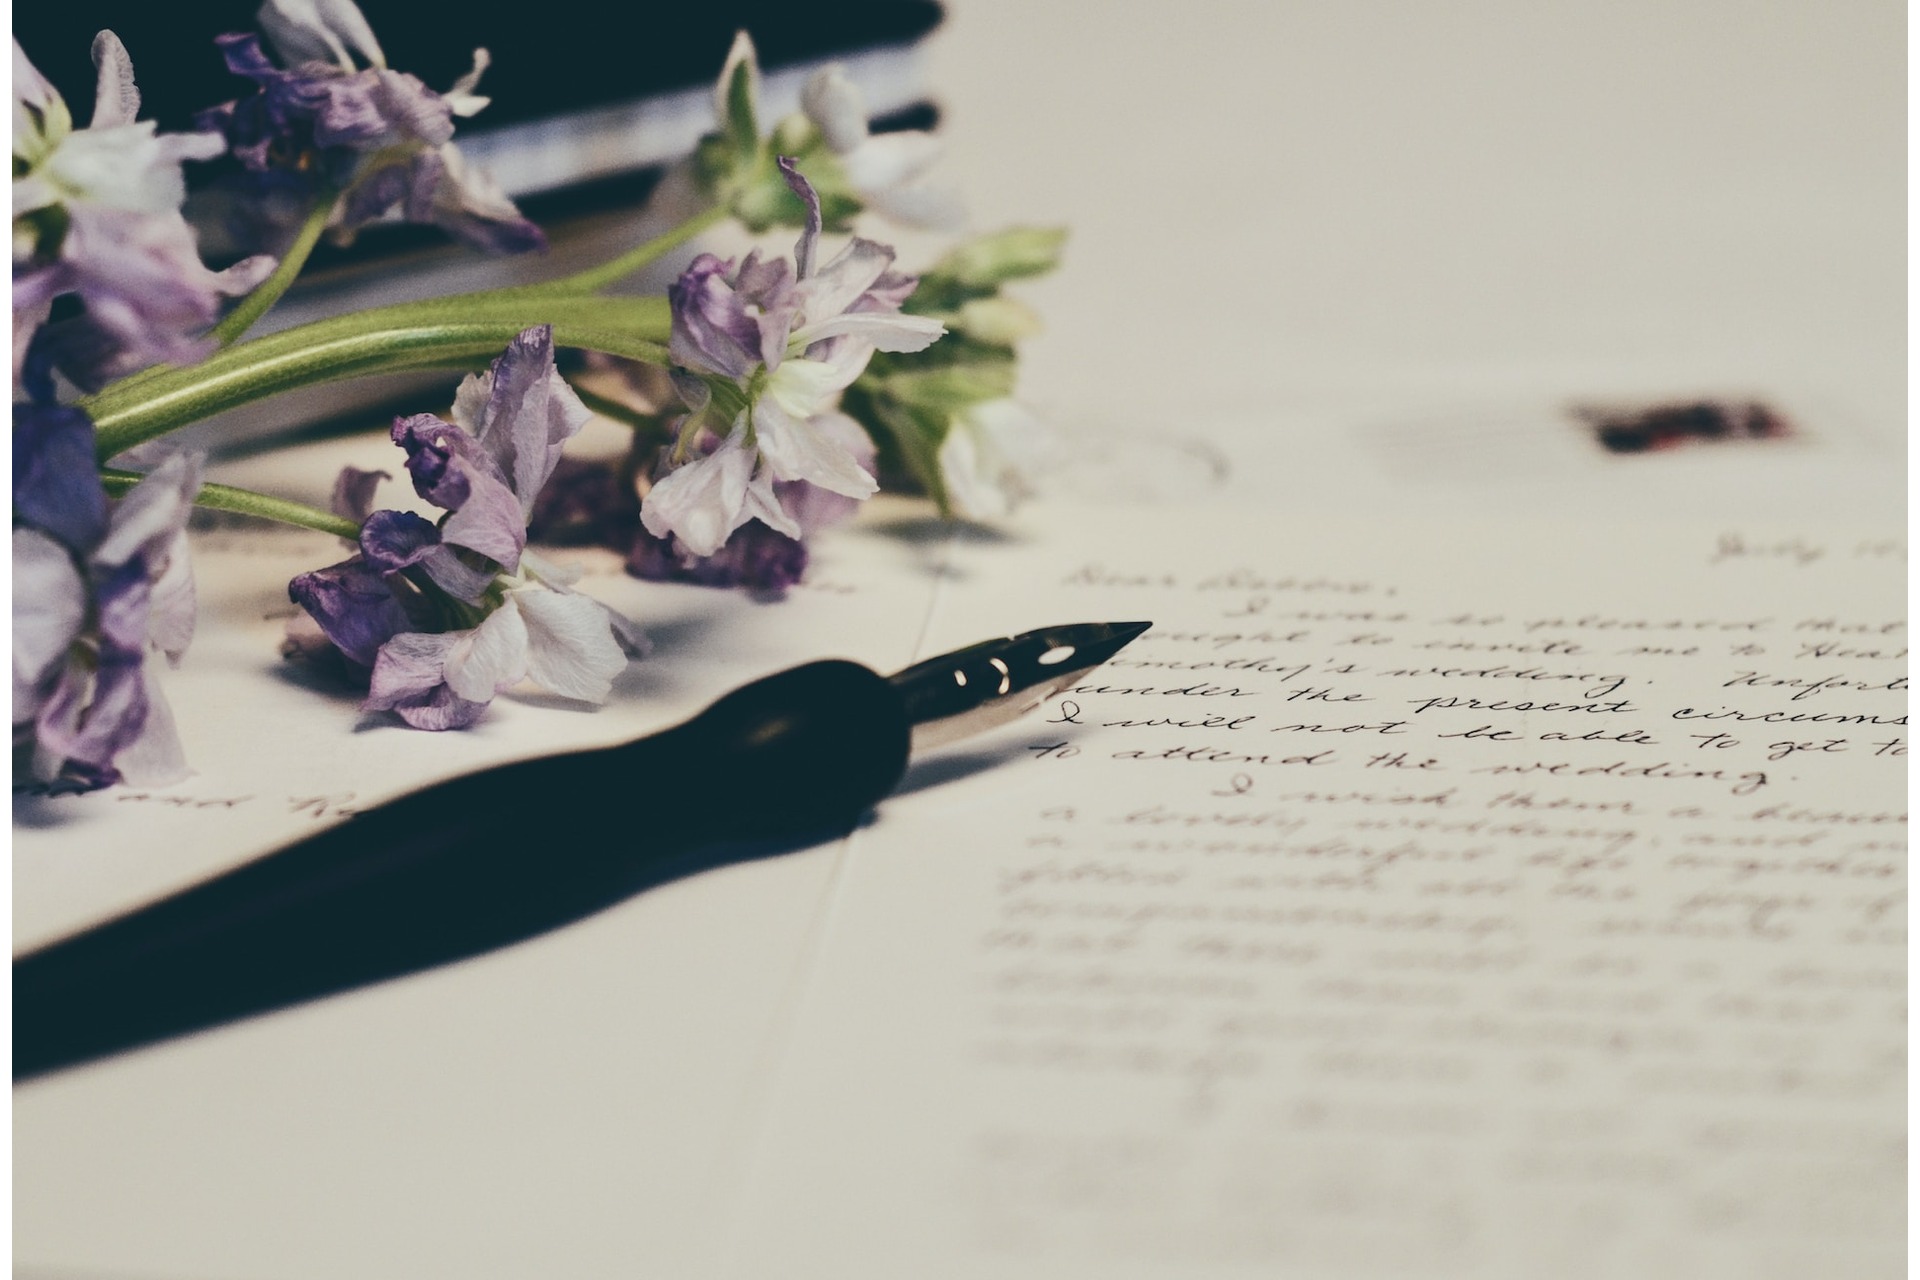 A pen and a wedding message to a couple with cursive writing, accompanied by purple flowers